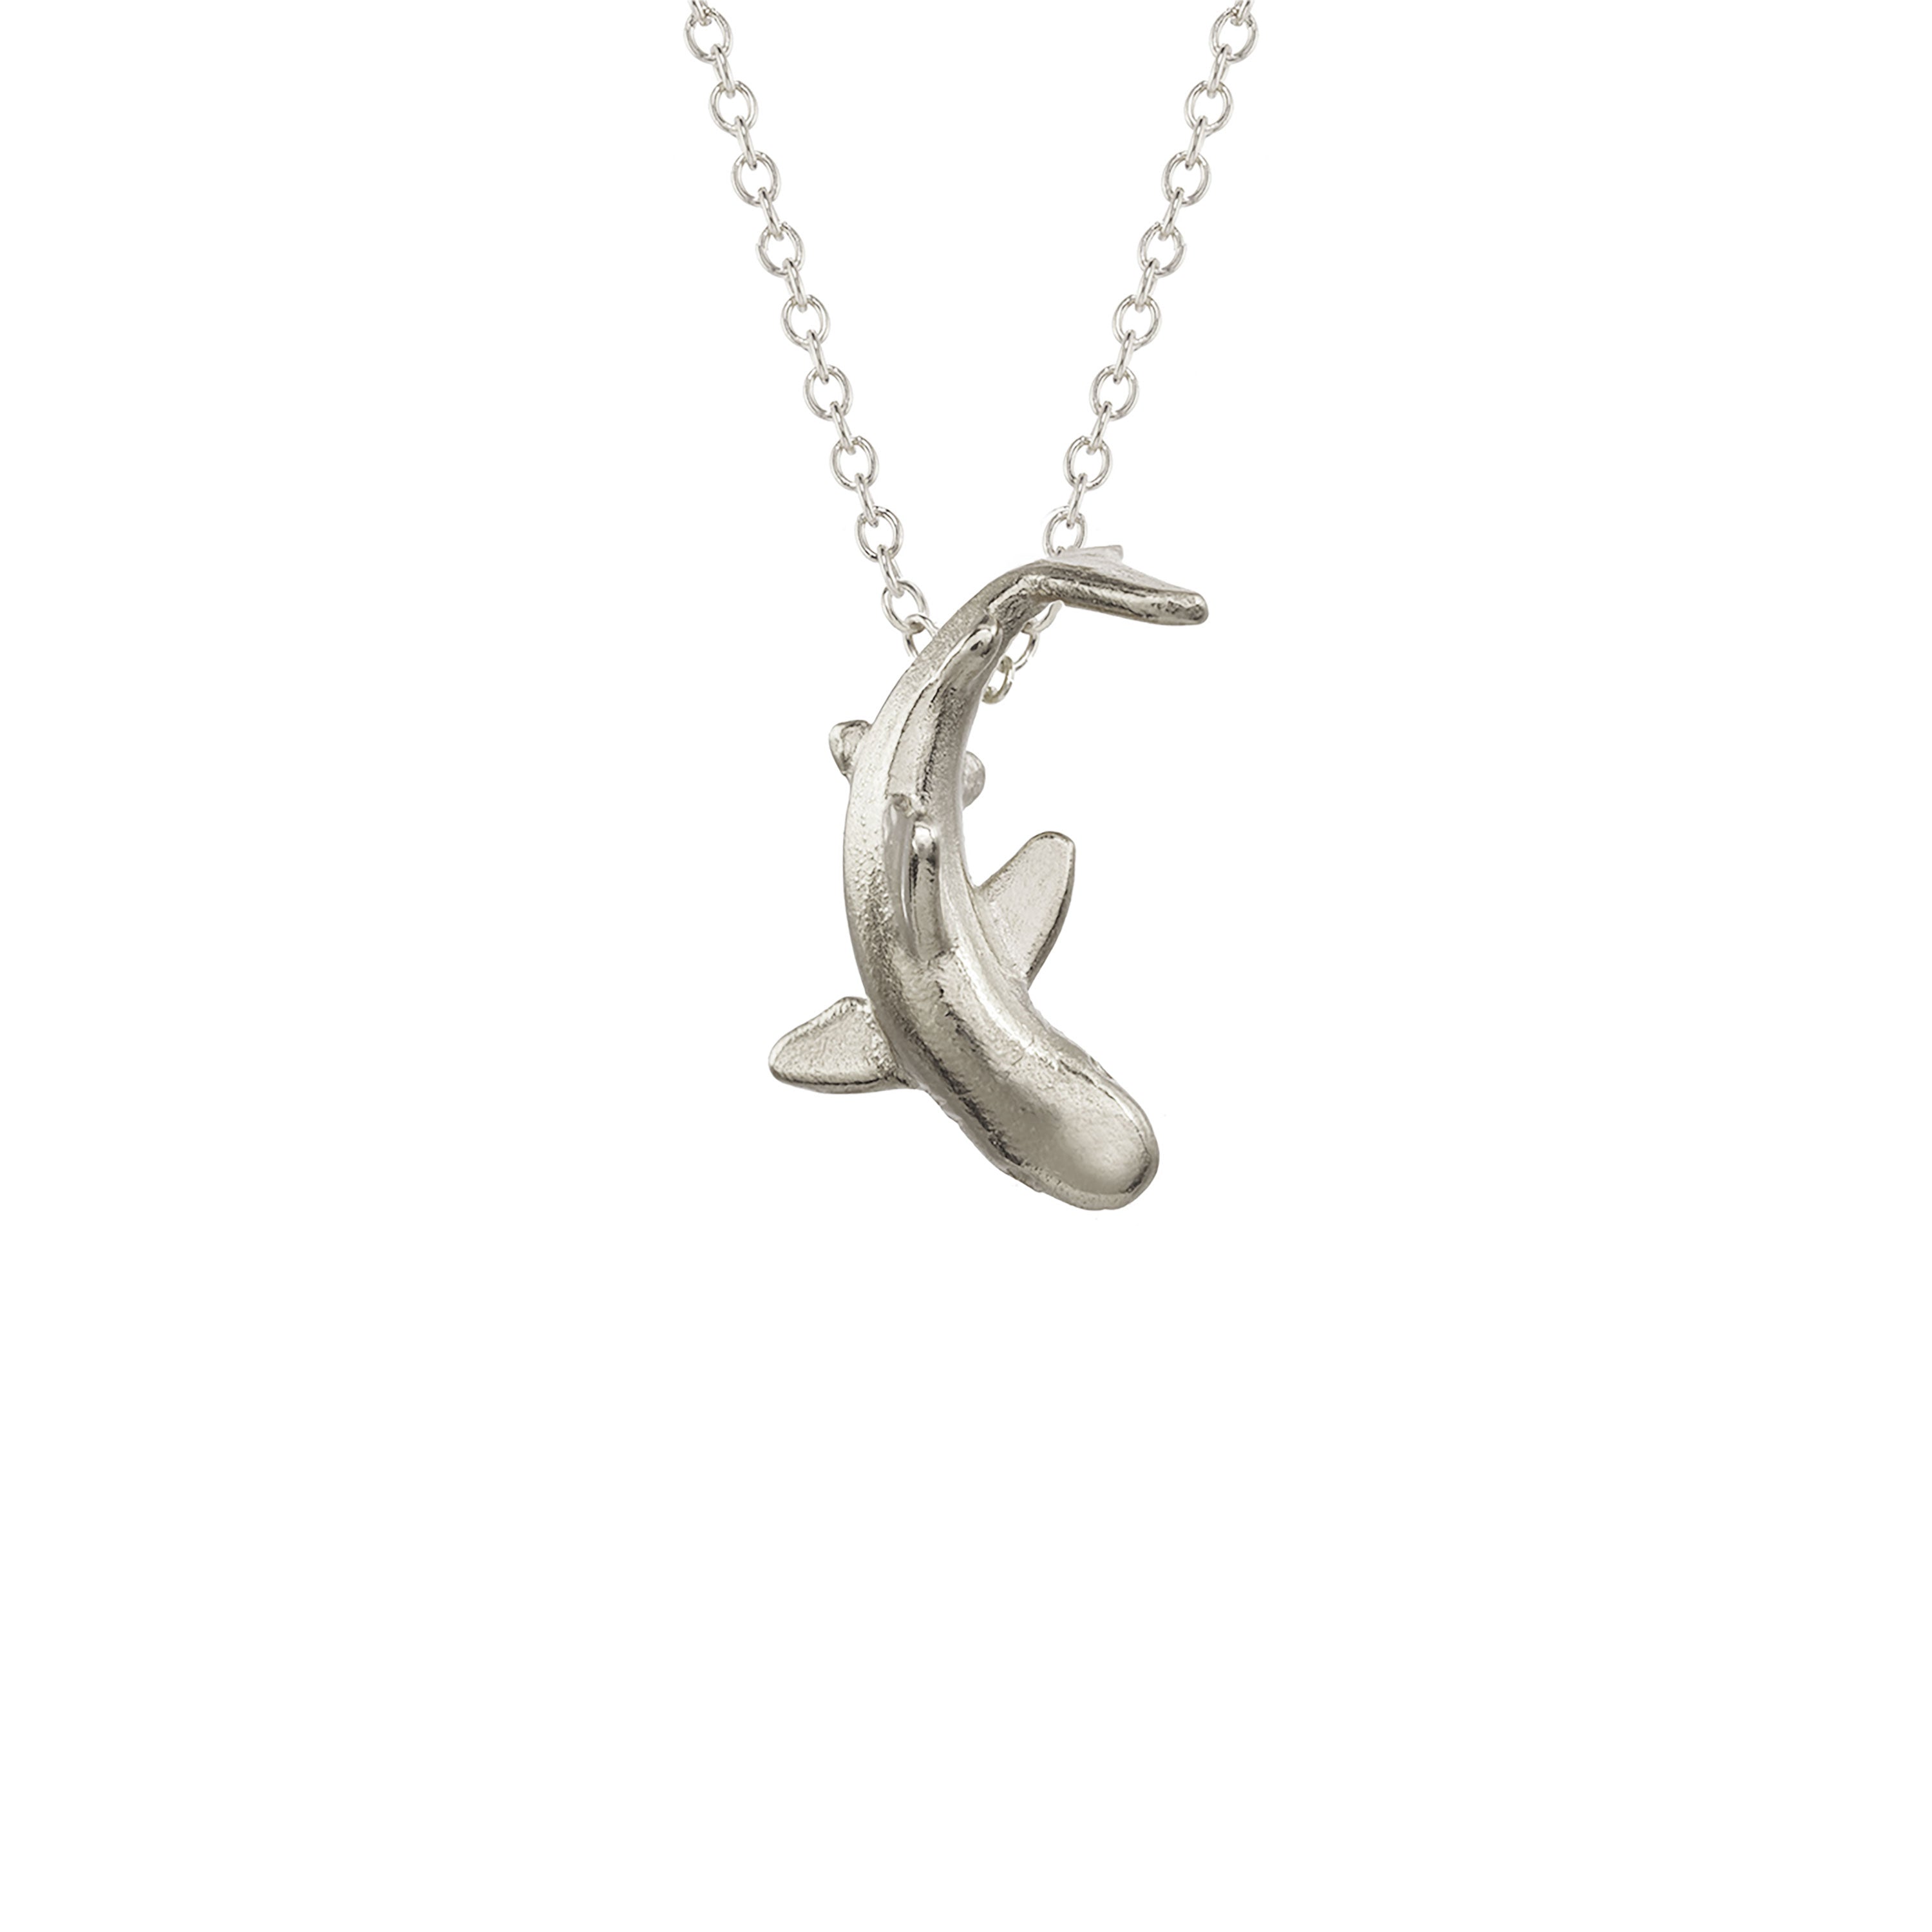 Small Shark Necklace